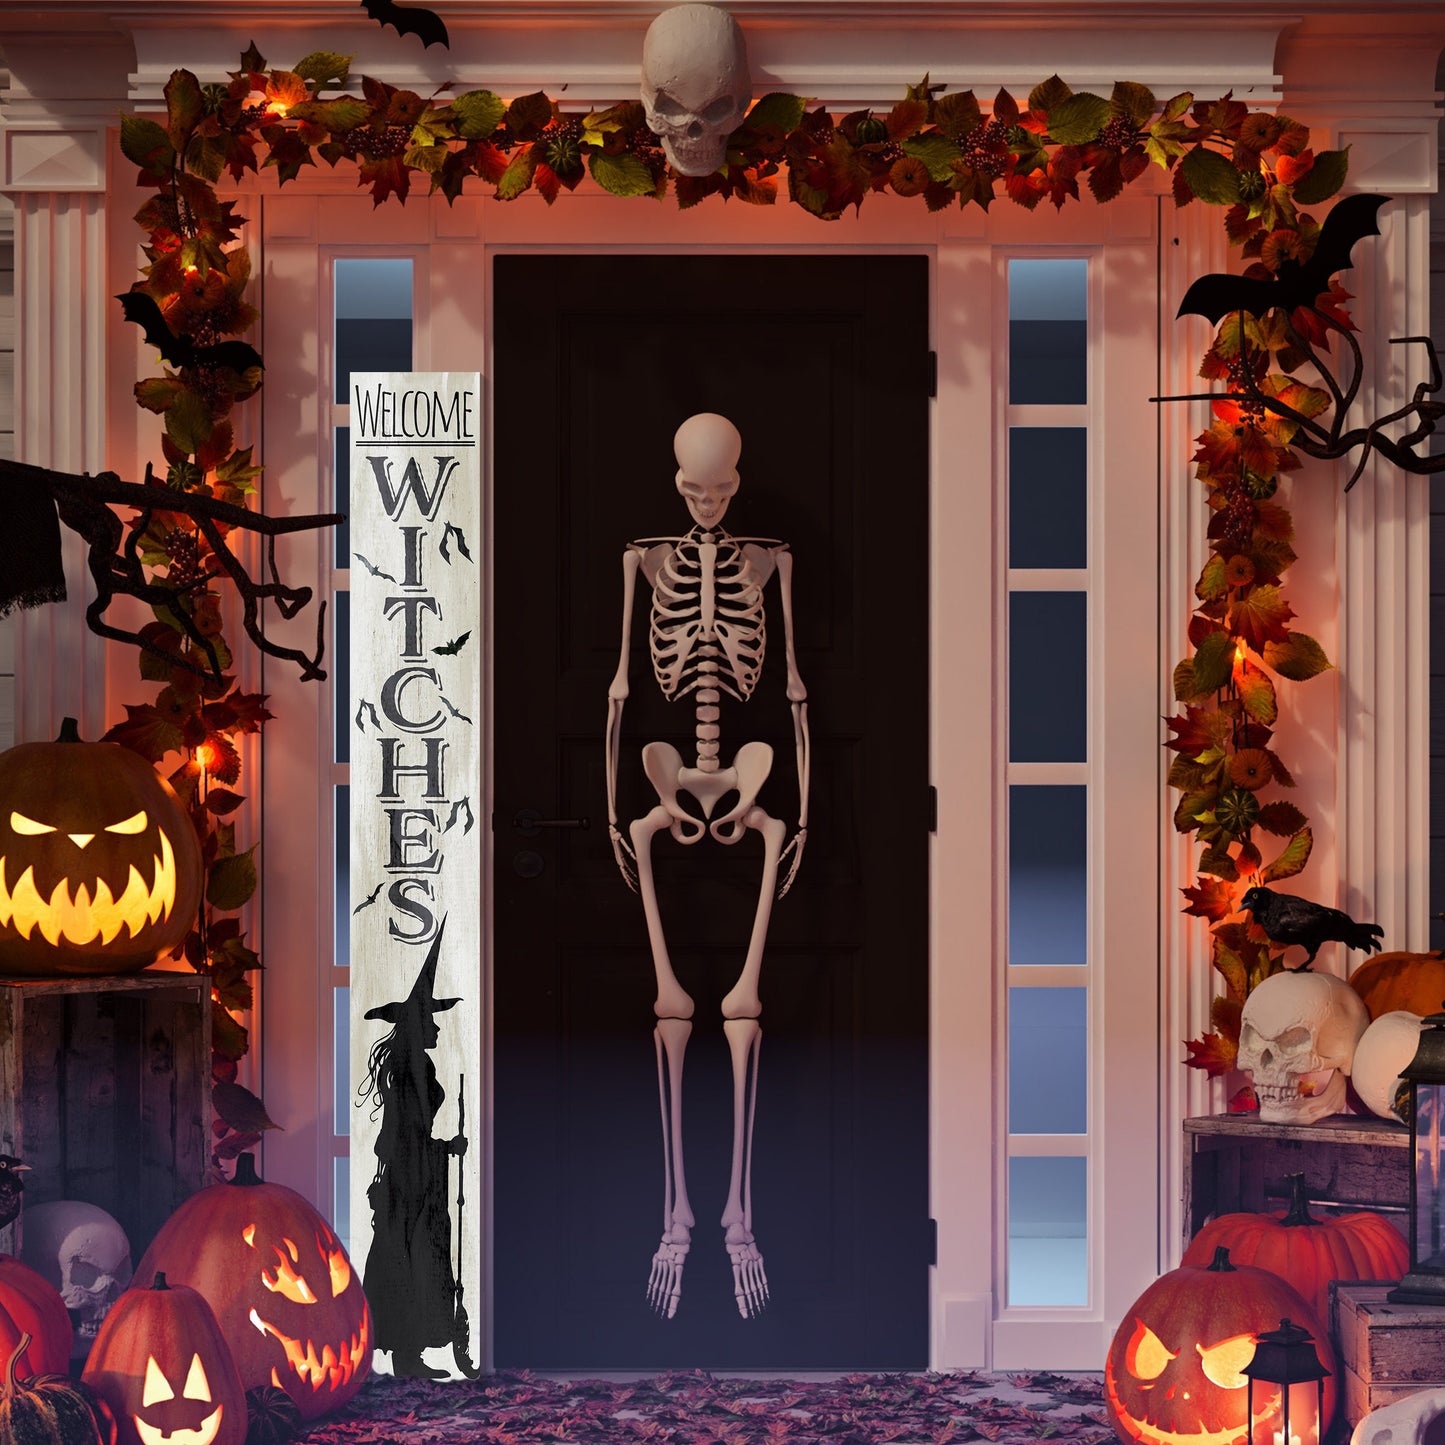 72-Inch "Welcome Witches" Wooden Halloween Sign - Spellbinding Front Door Decor for Porch, Entryway, and Spooky Season Festivities